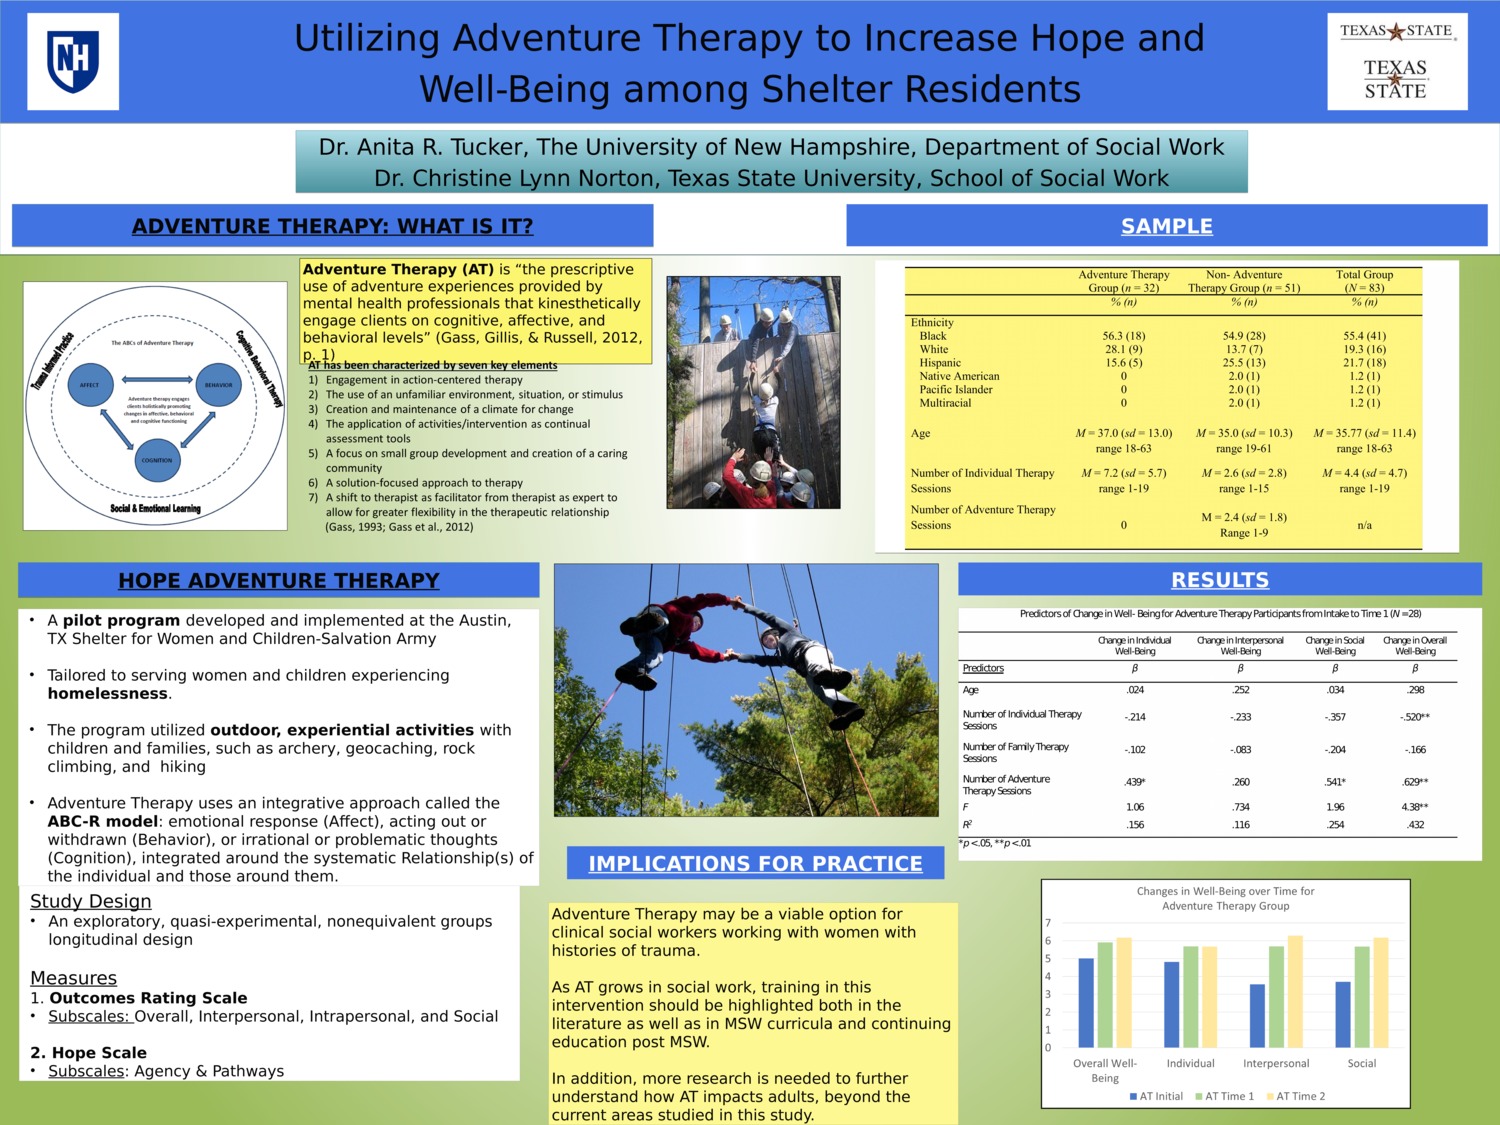 Utilizing Adventure Therapy To Increase Hope And Well-Being Among Shelter Residents by arc4